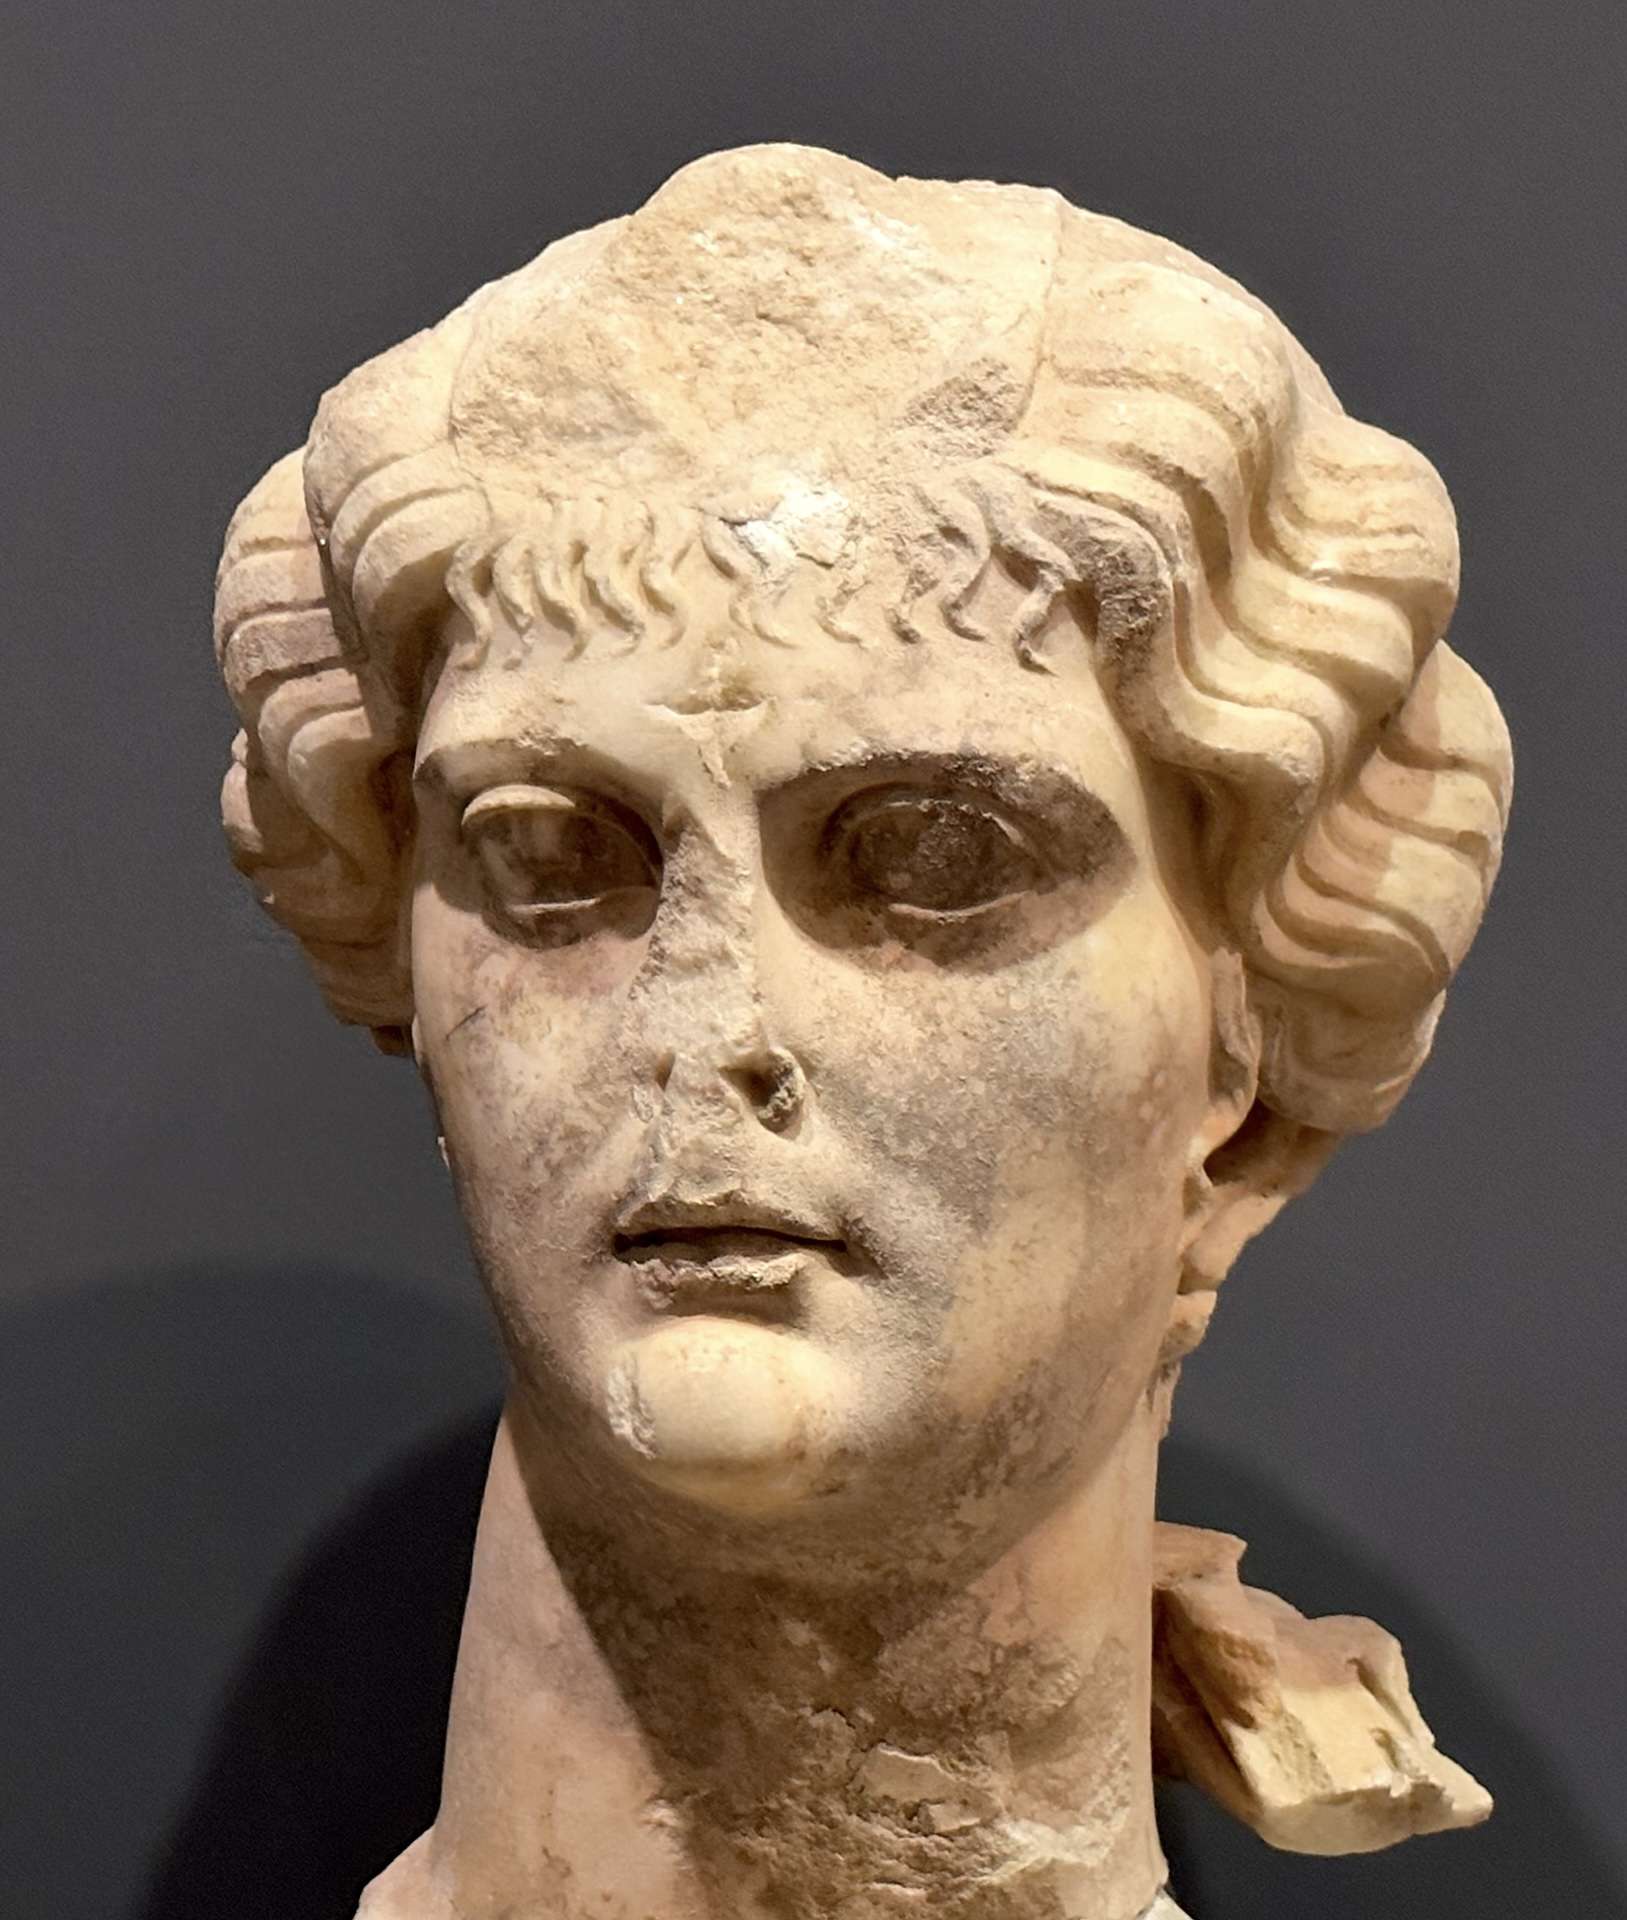 Cross carved into the head of Empress Livia